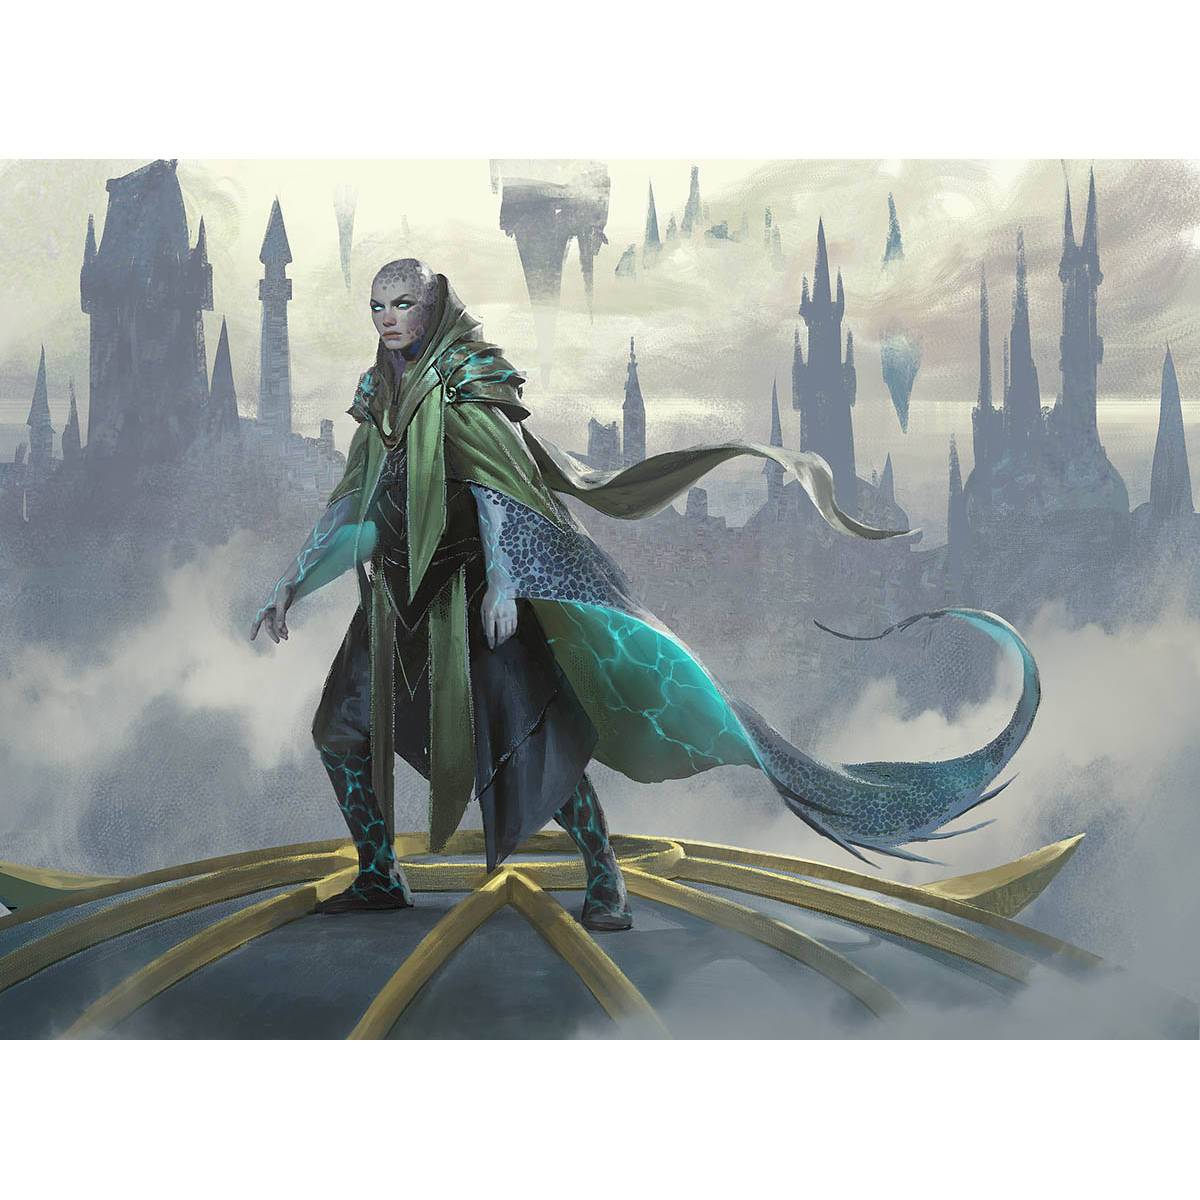 Skatewing Spy Print - Print - Original Magic Art - Accessories for Magic the Gathering and other card games